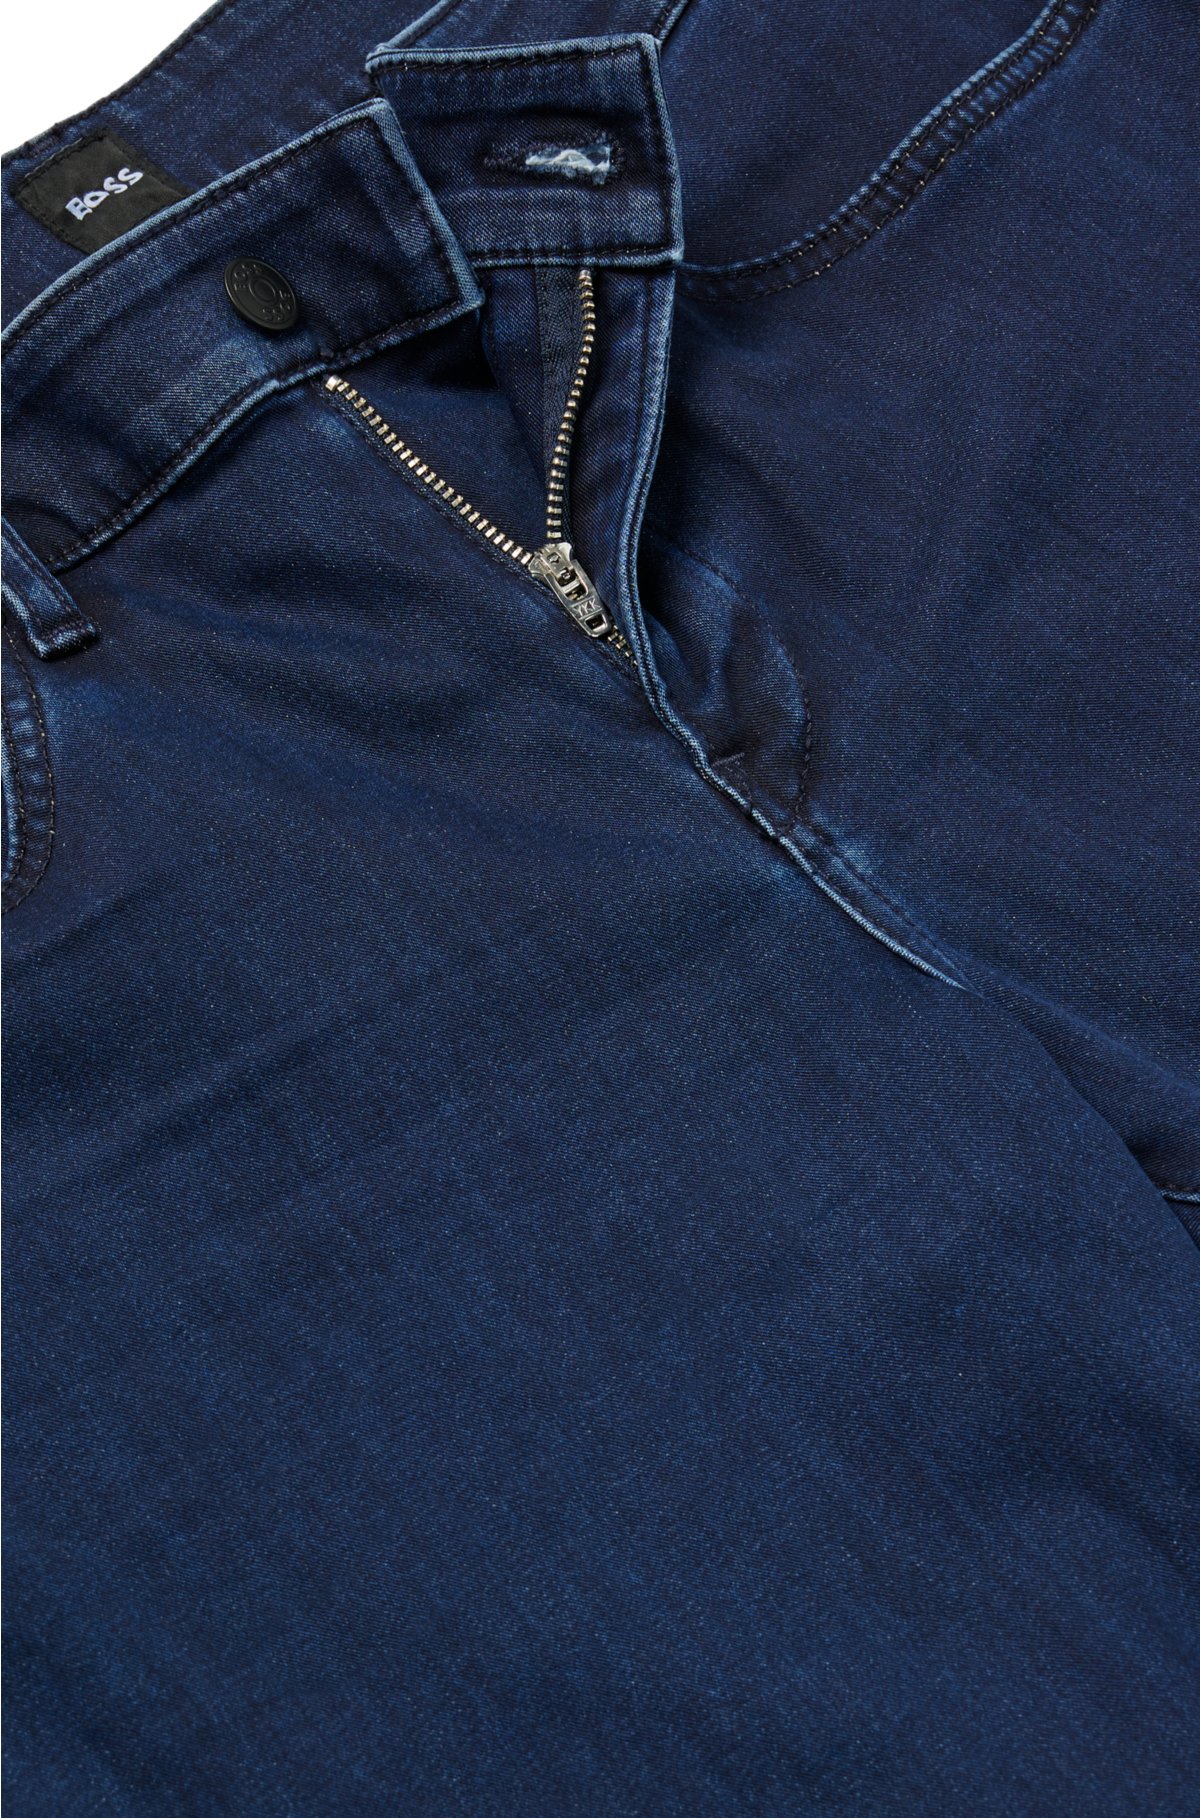 BOSS Slim-fit jeans in blue satin-touch